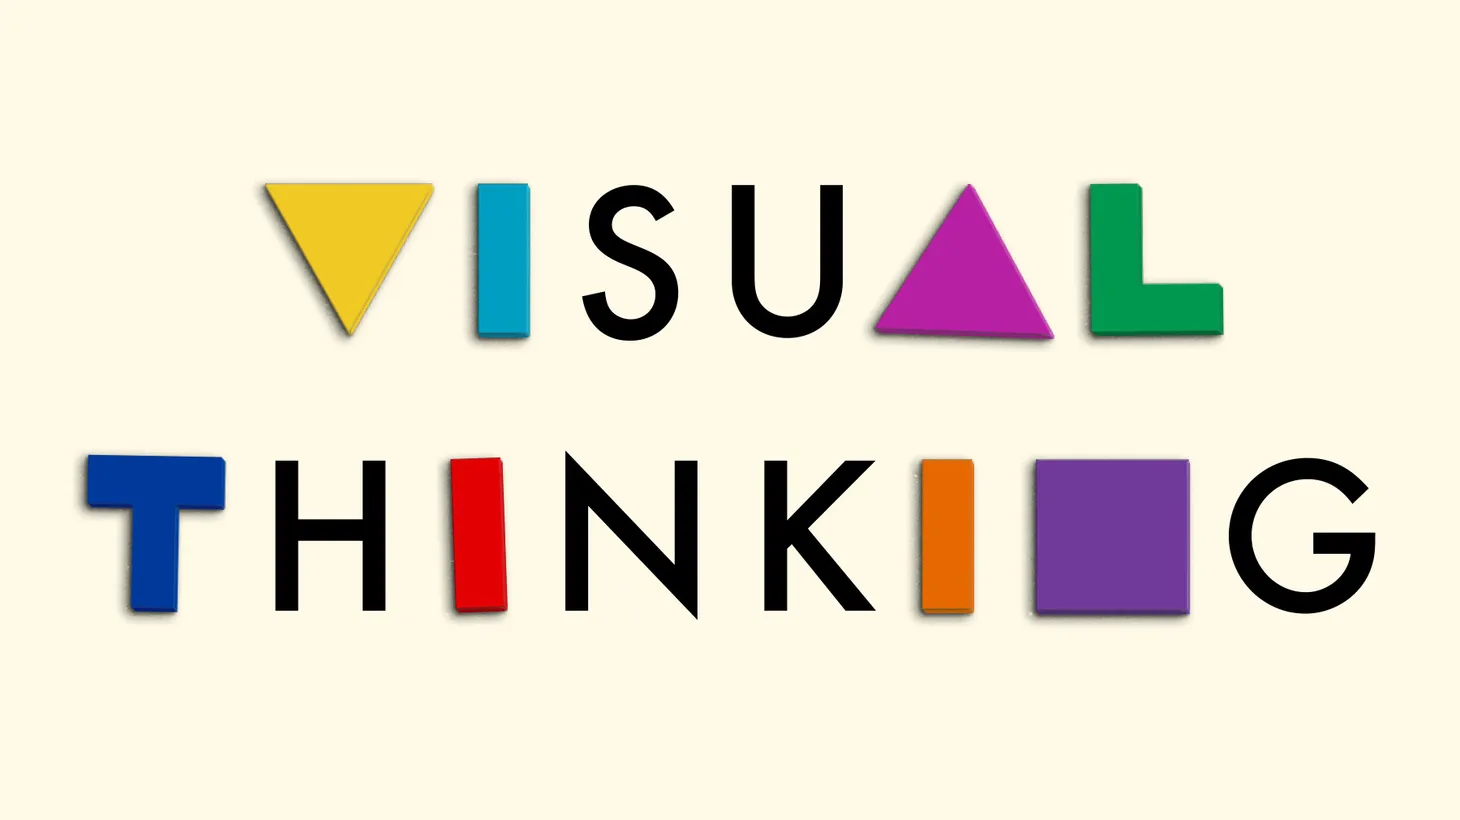 Temple Grandin’s latest book is “Visual Thinking: The Hidden Gifts of People Who Think in Pictures, Patterns, and Abstractions.”